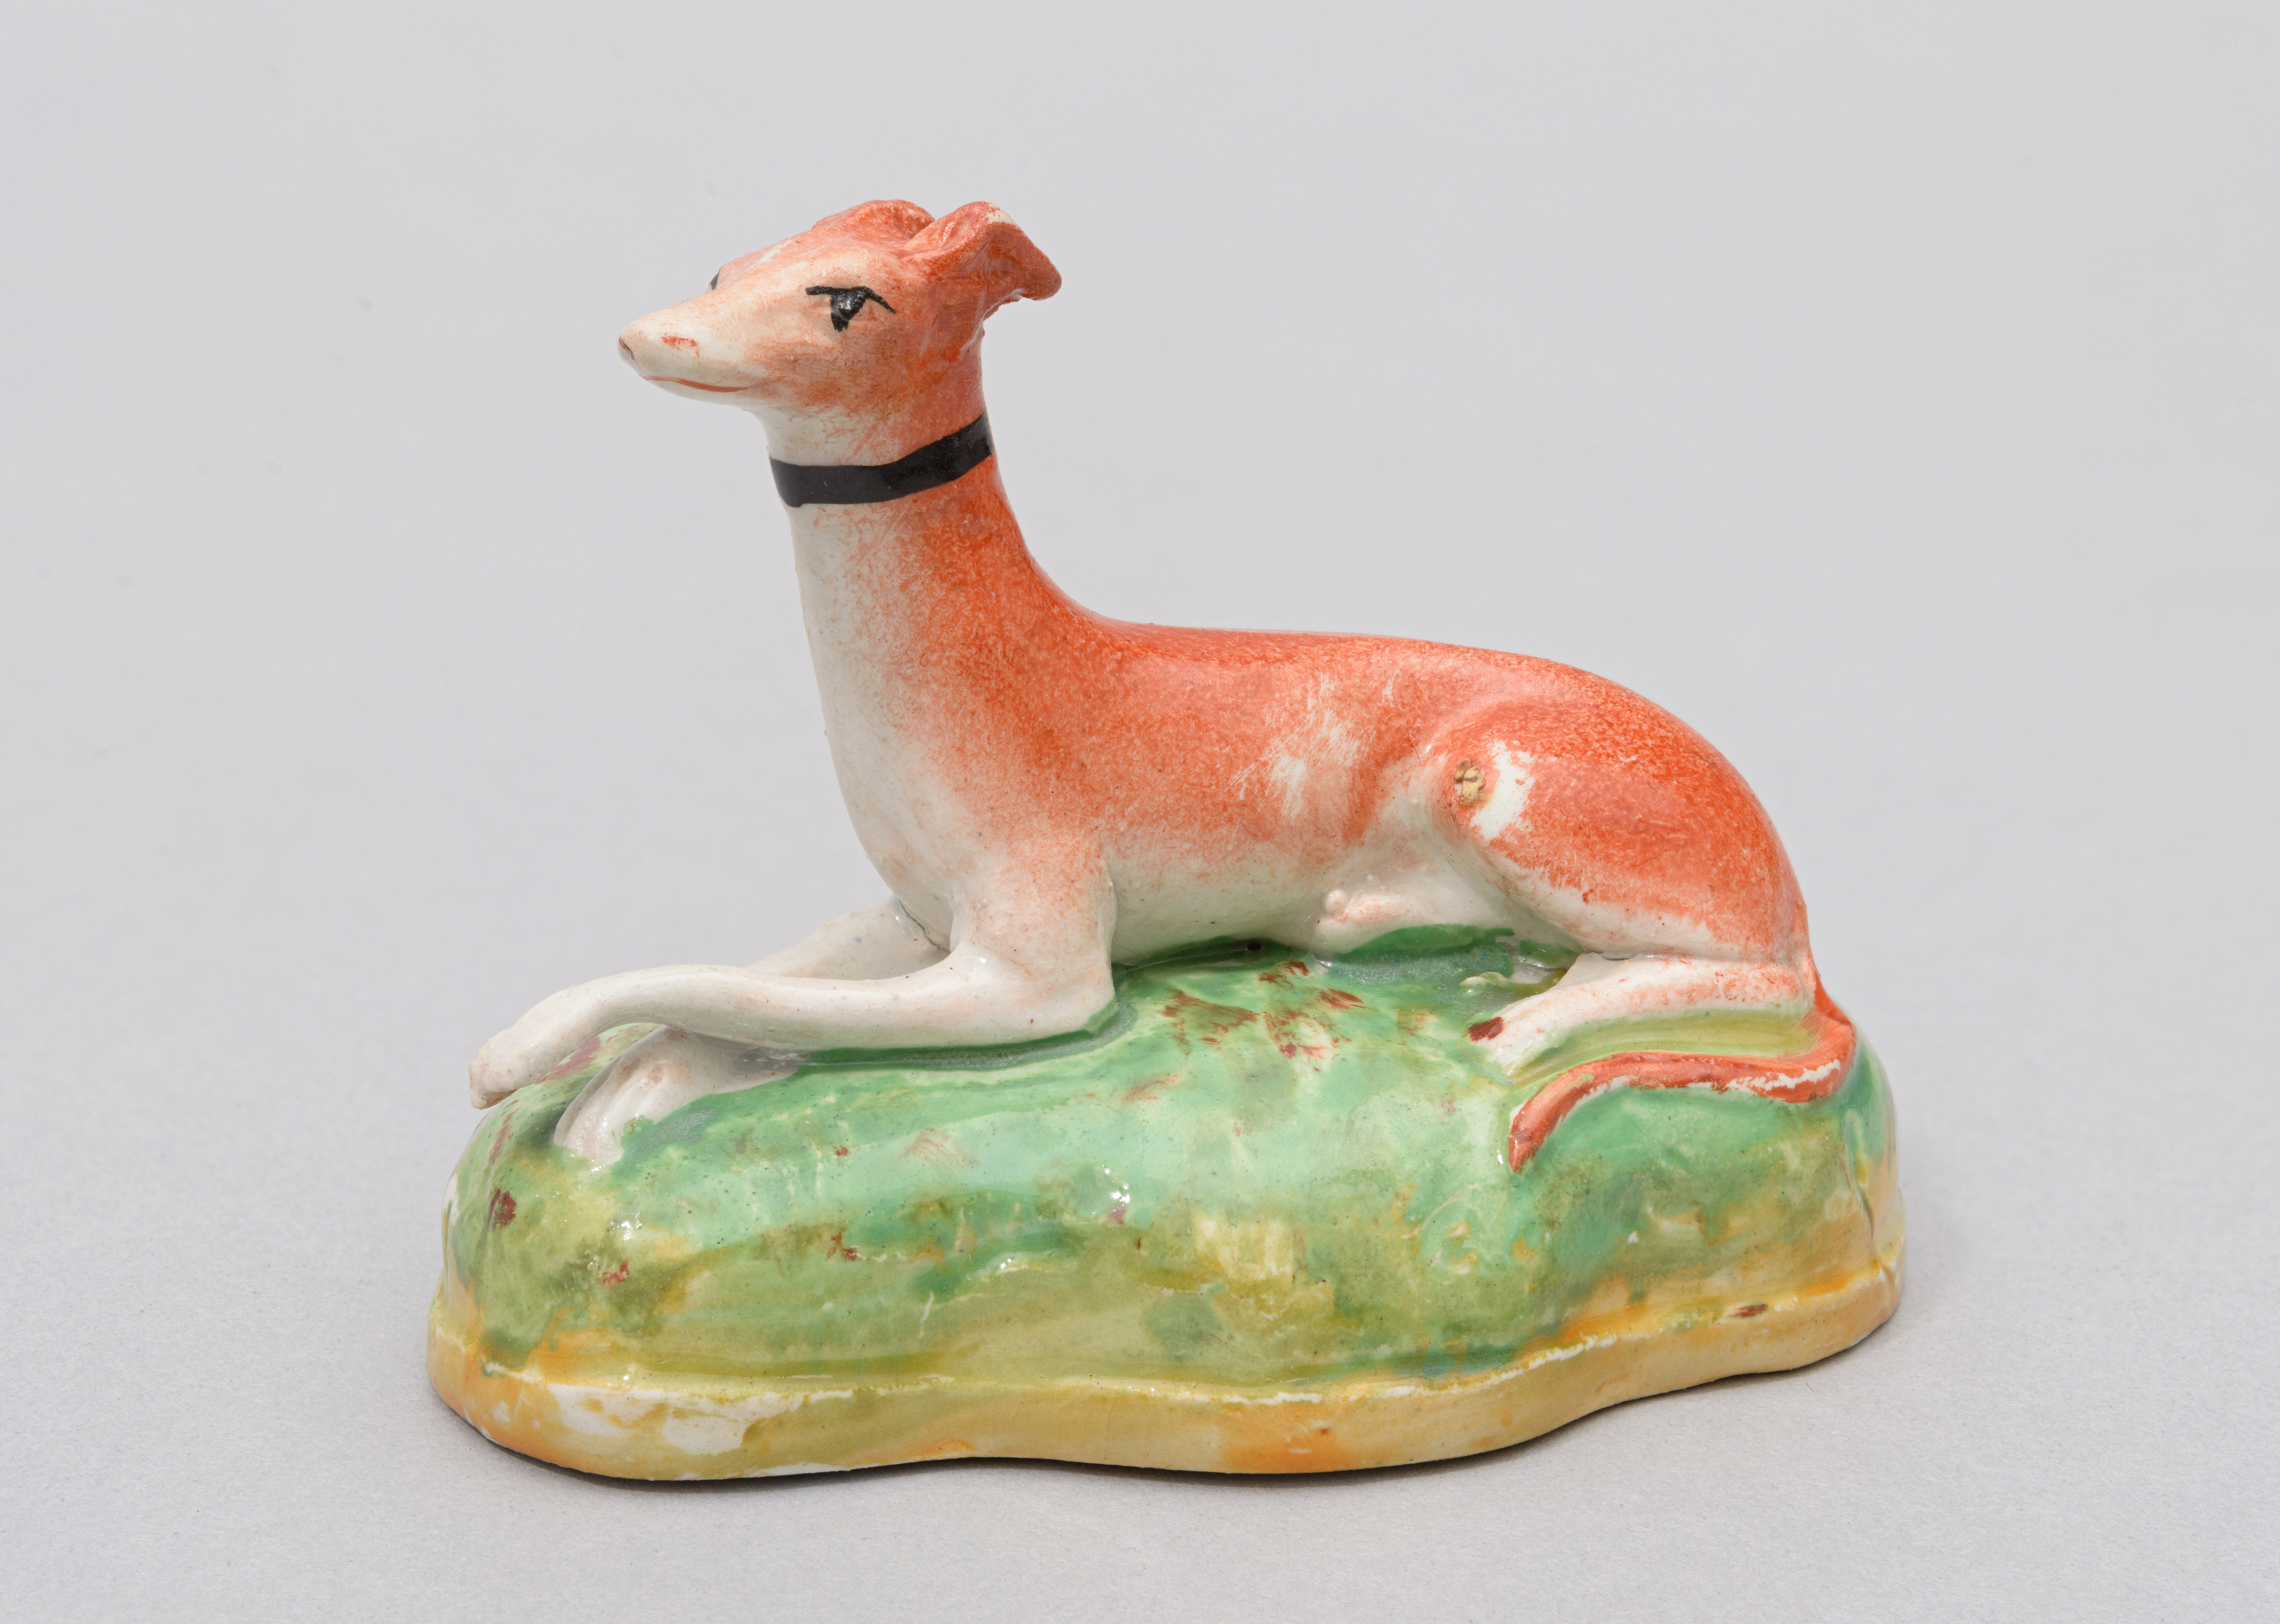 A ceramic figure of a greyhound dog with red coat and a black collar. The greyhound is sitting on a green grassy patch.